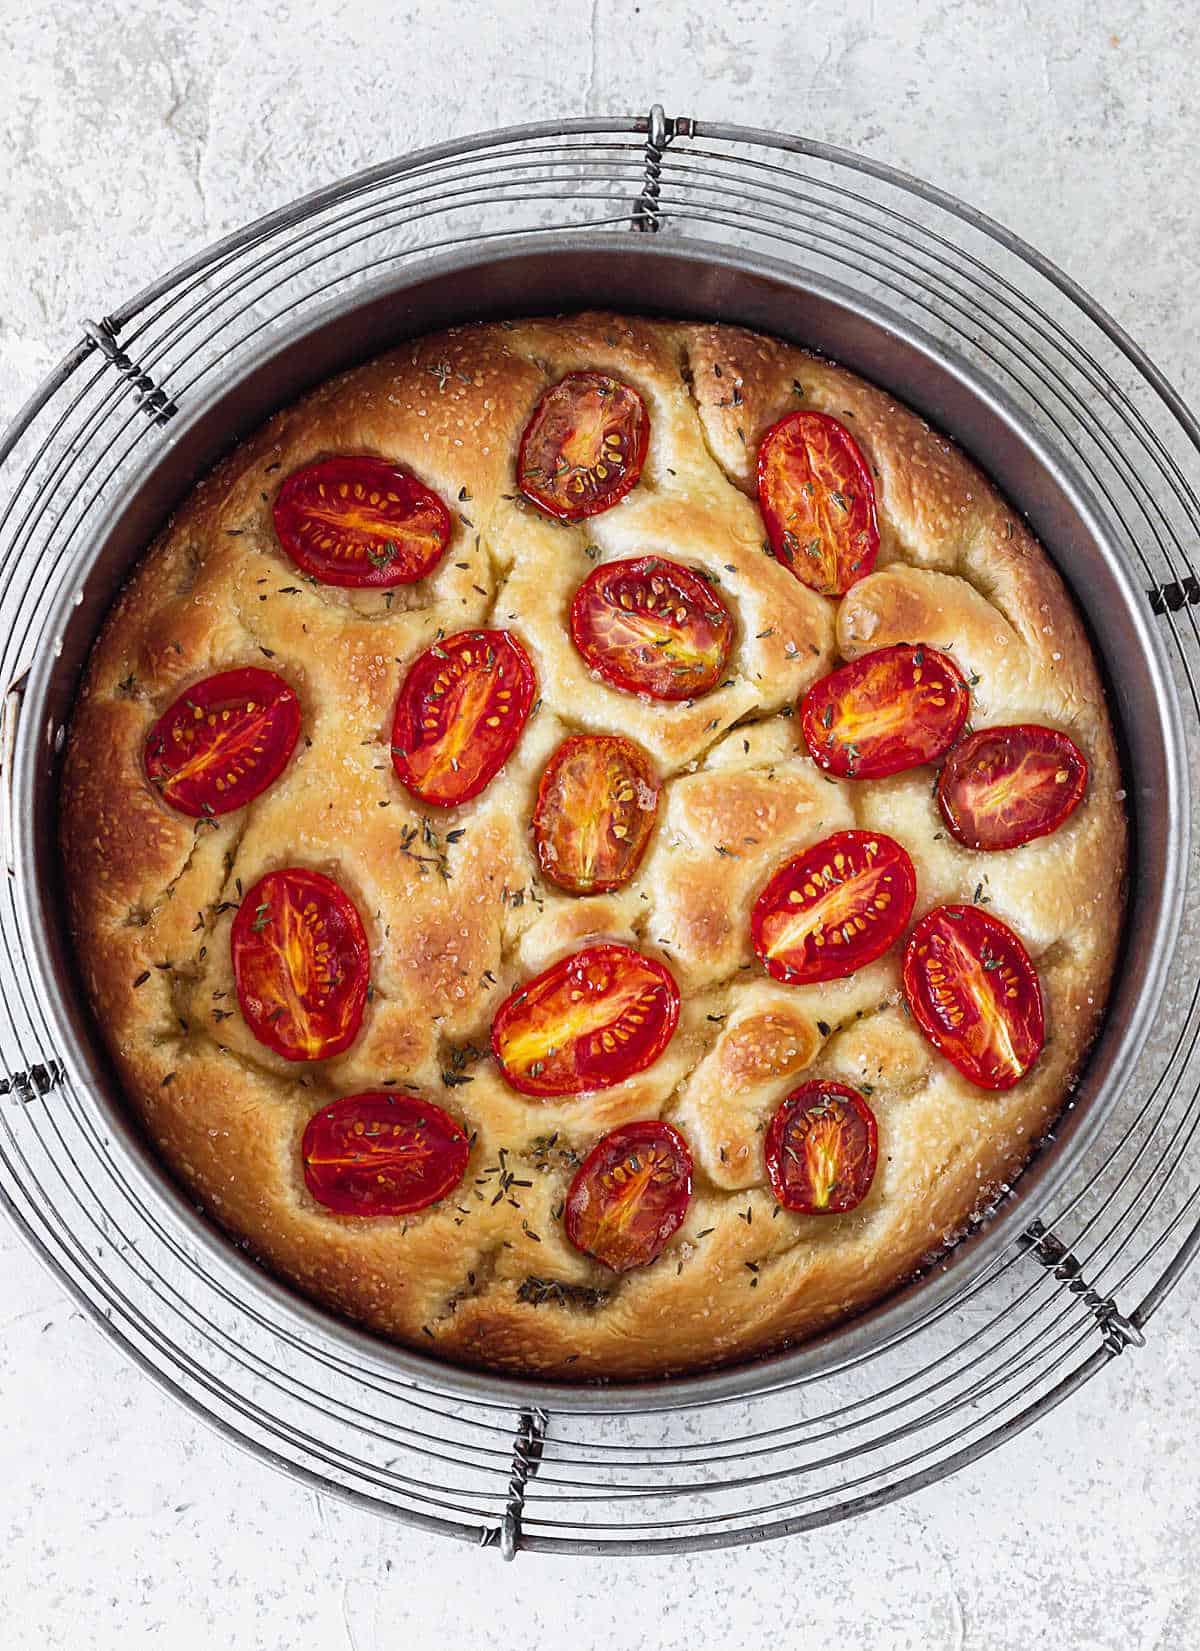 Top view of baked tomato focaccia on round pan on wire rack, grey surface